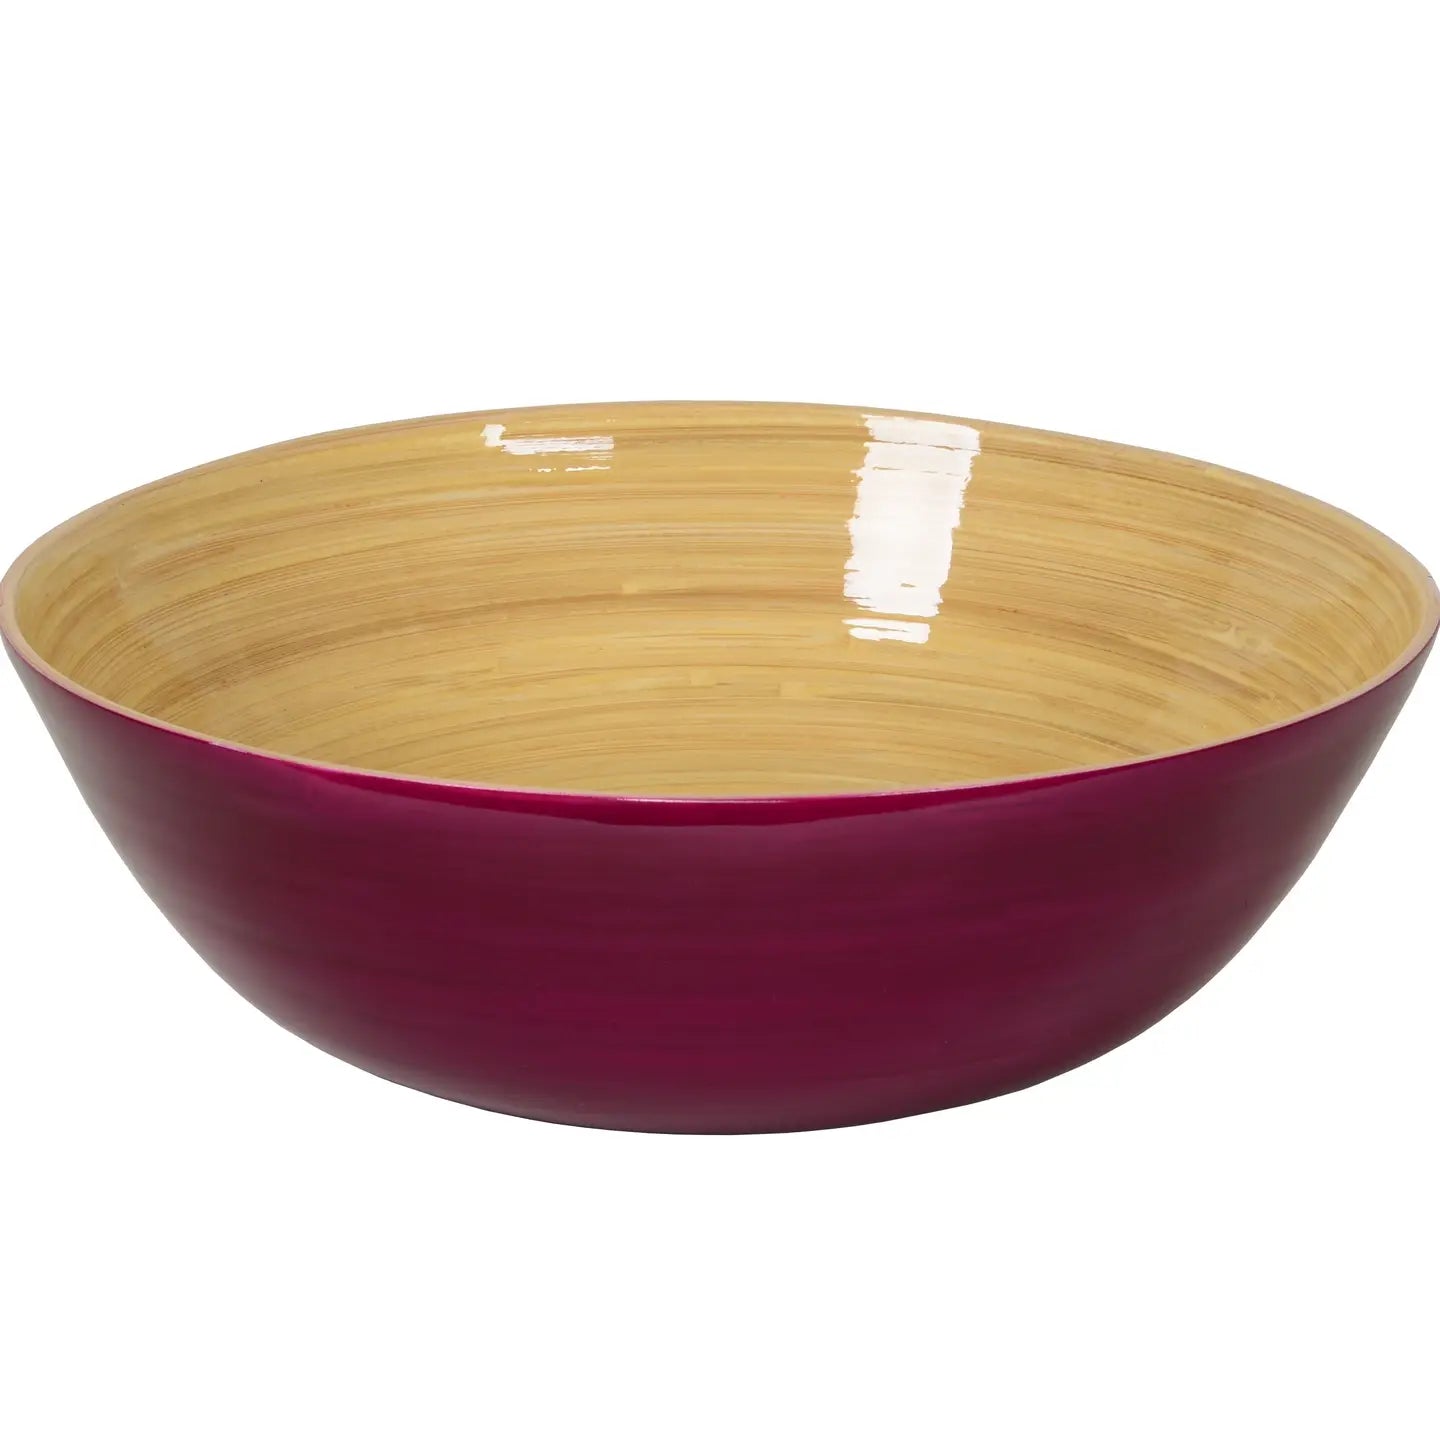 Bamboo Classic Bowl and Serving Set - Blackberry